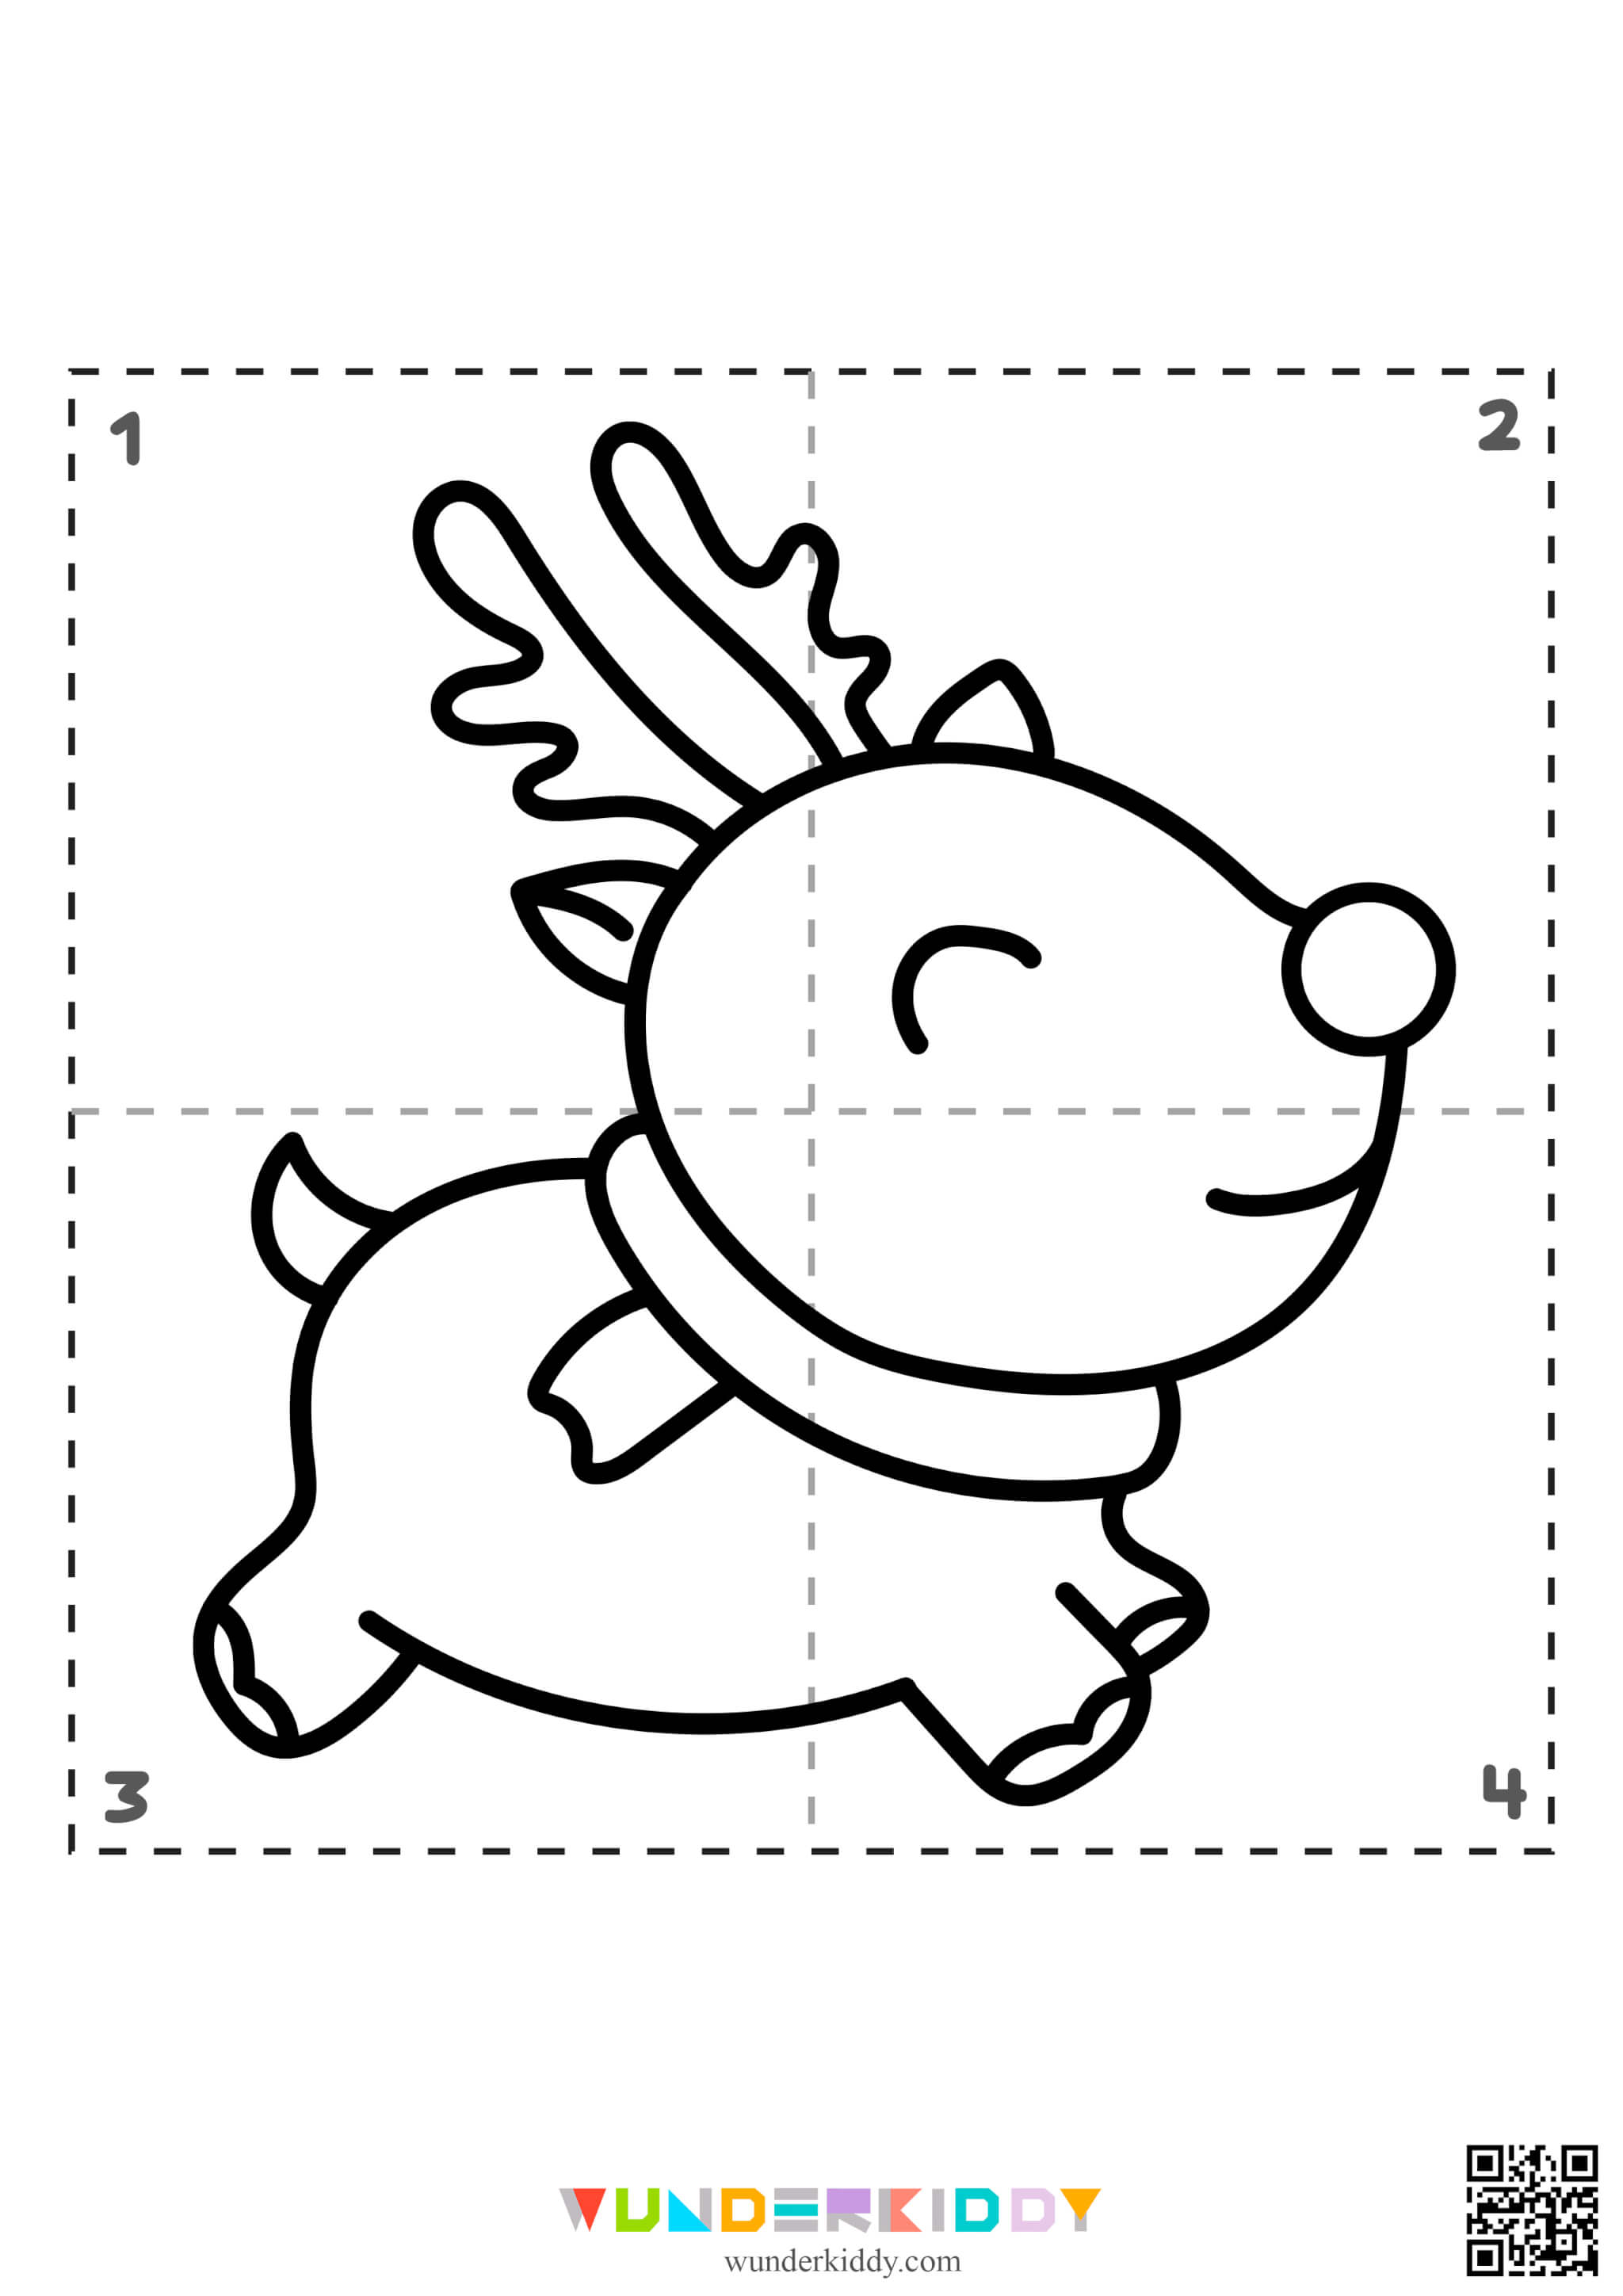 Coloring pages «New Year's Puzzle» - Image 12